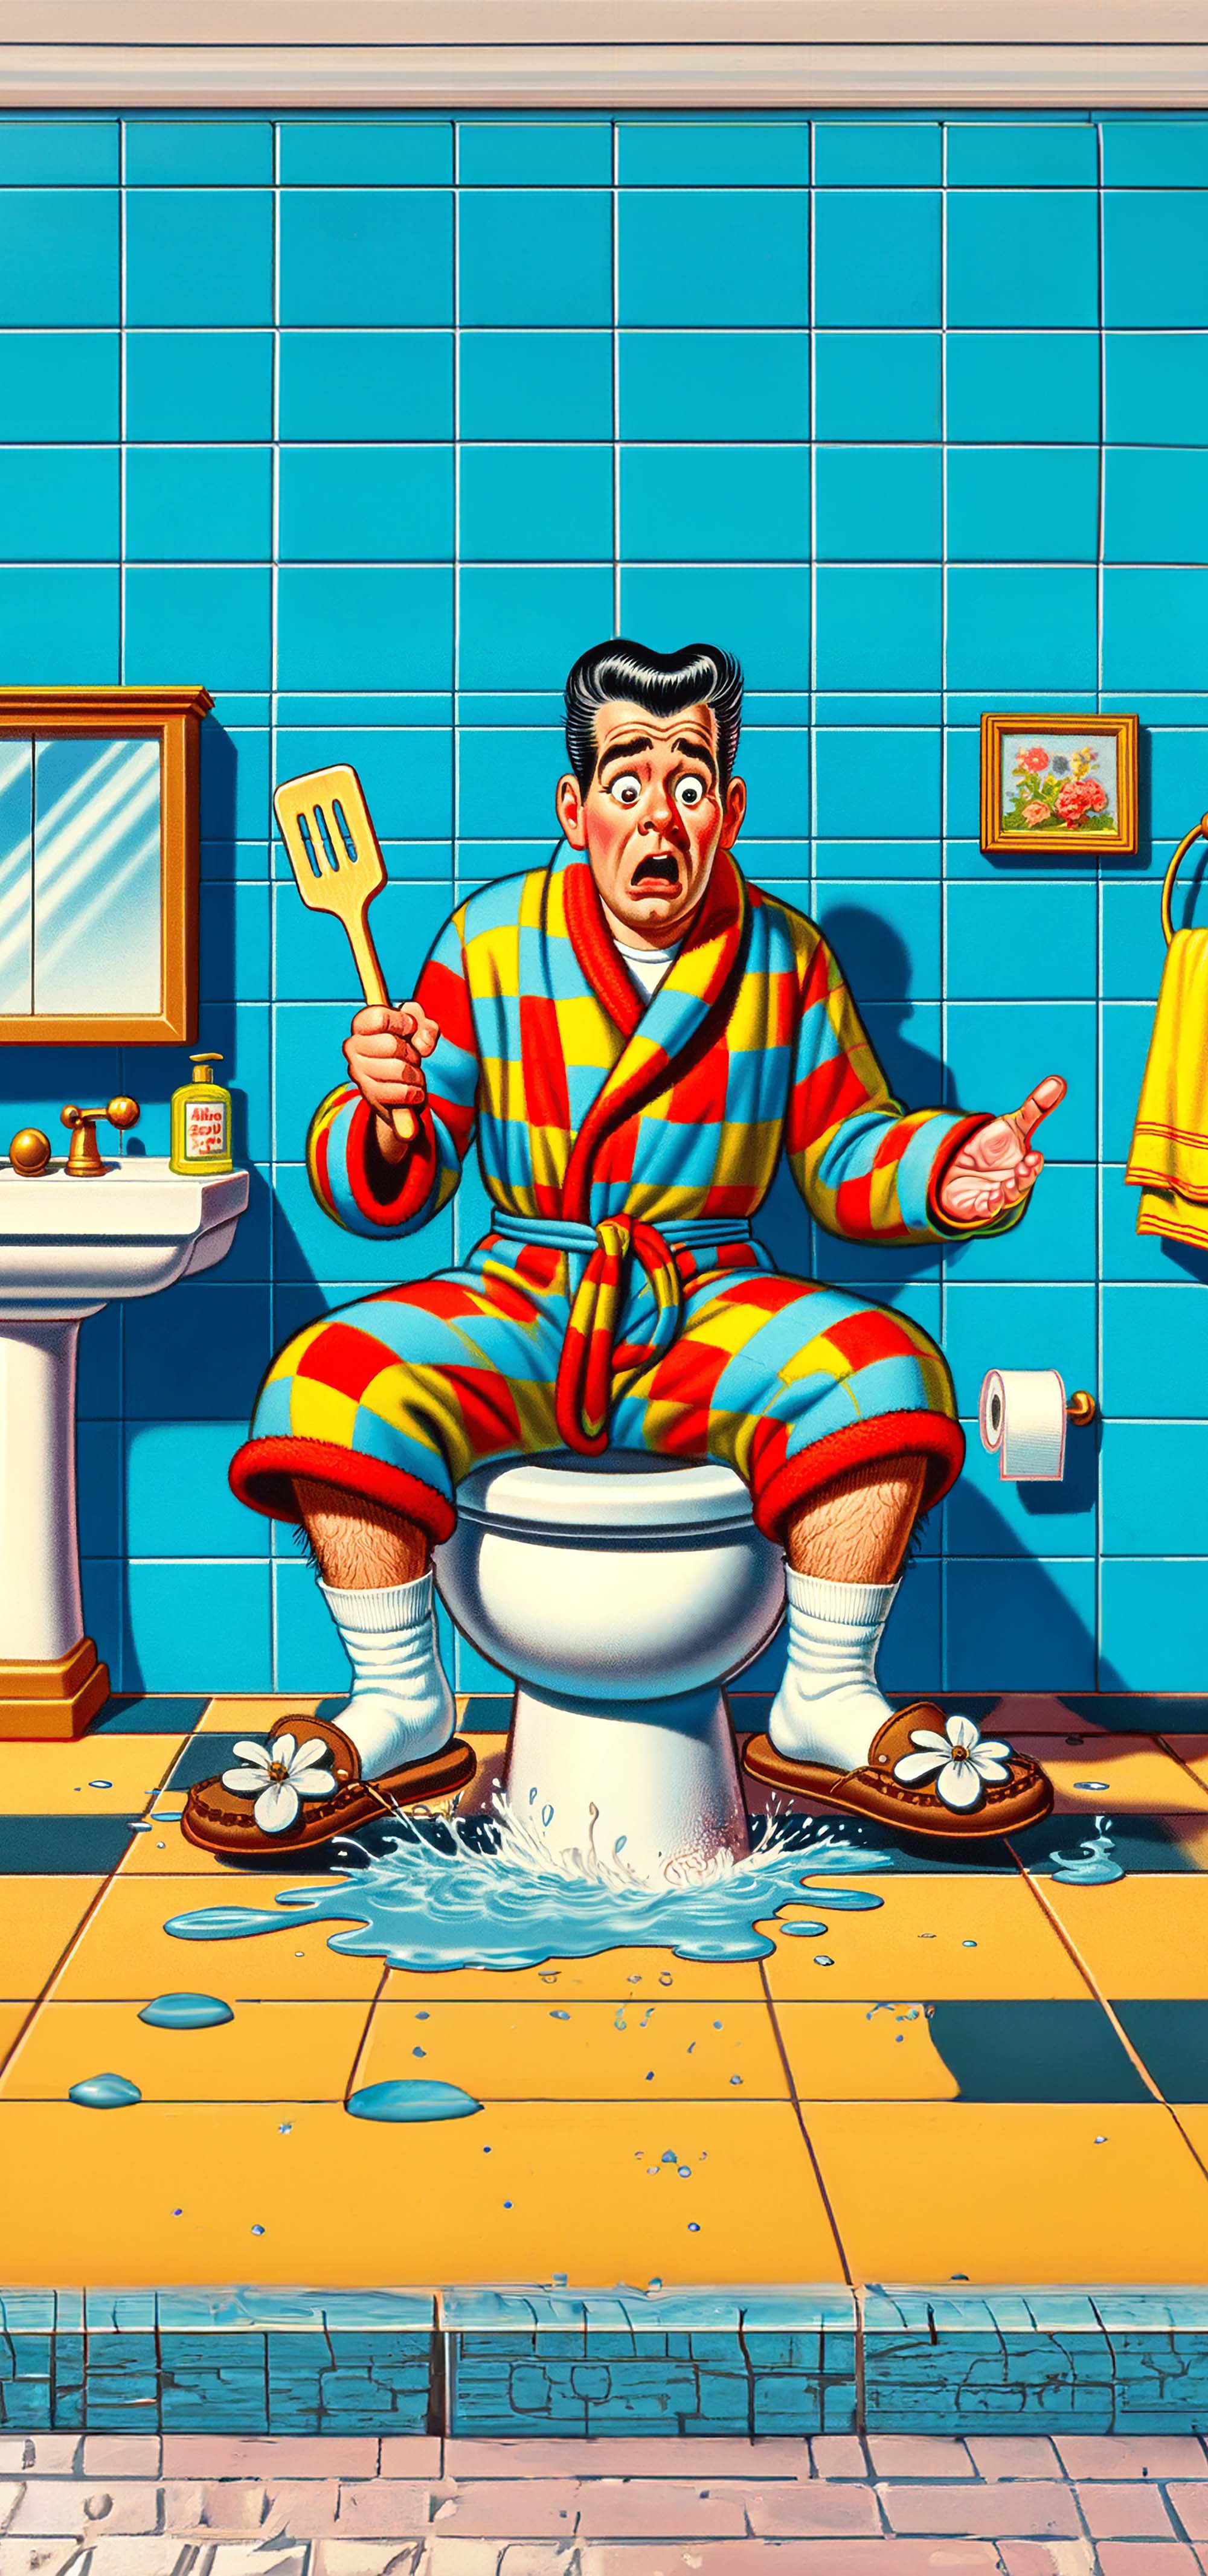 Cartoon image of a man sitting on his broken toilet with a spatula in his hand.